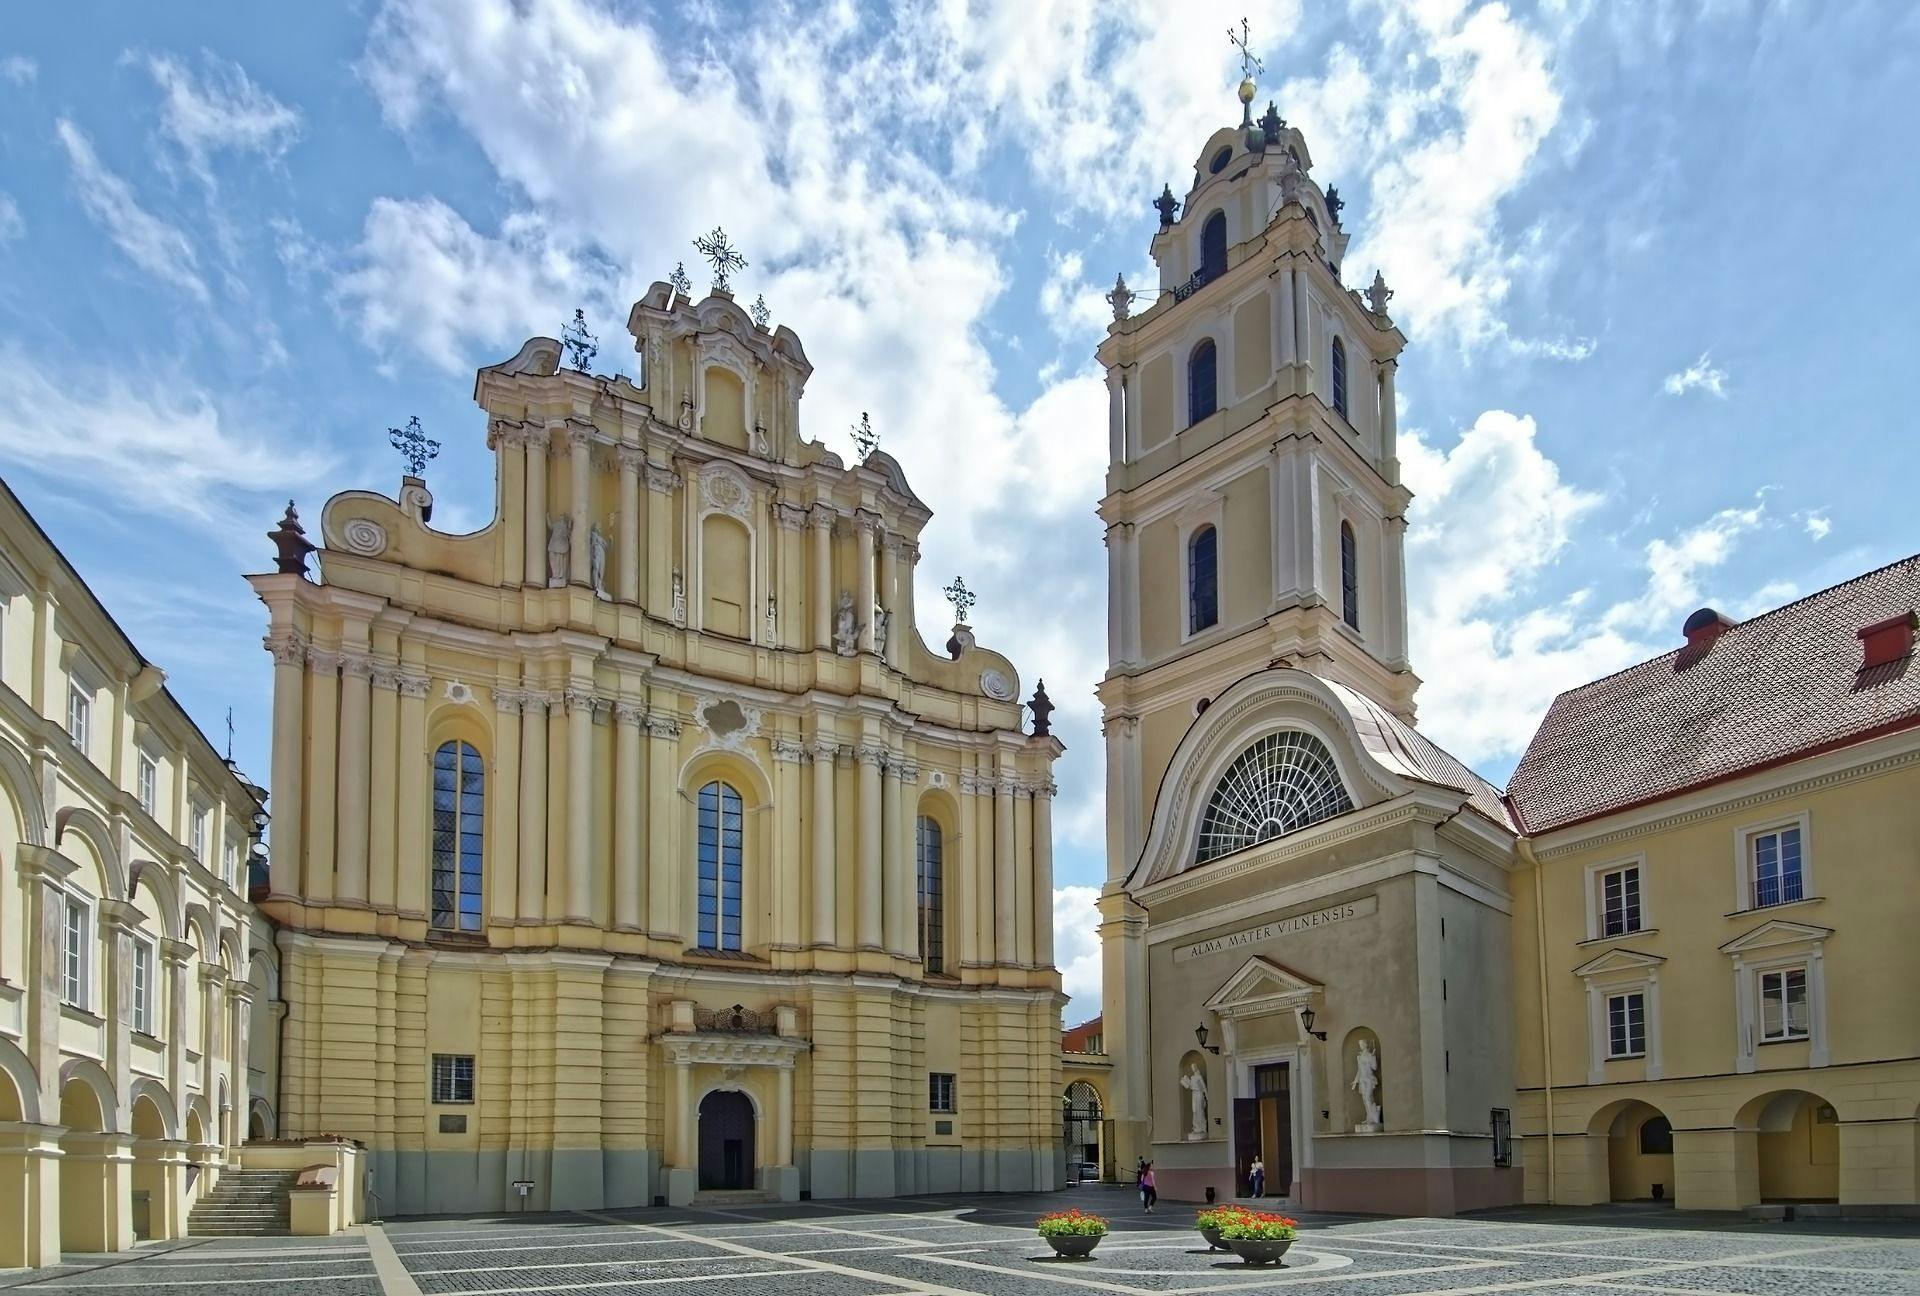 Private architectural tour of Vilnius with a local as your guide